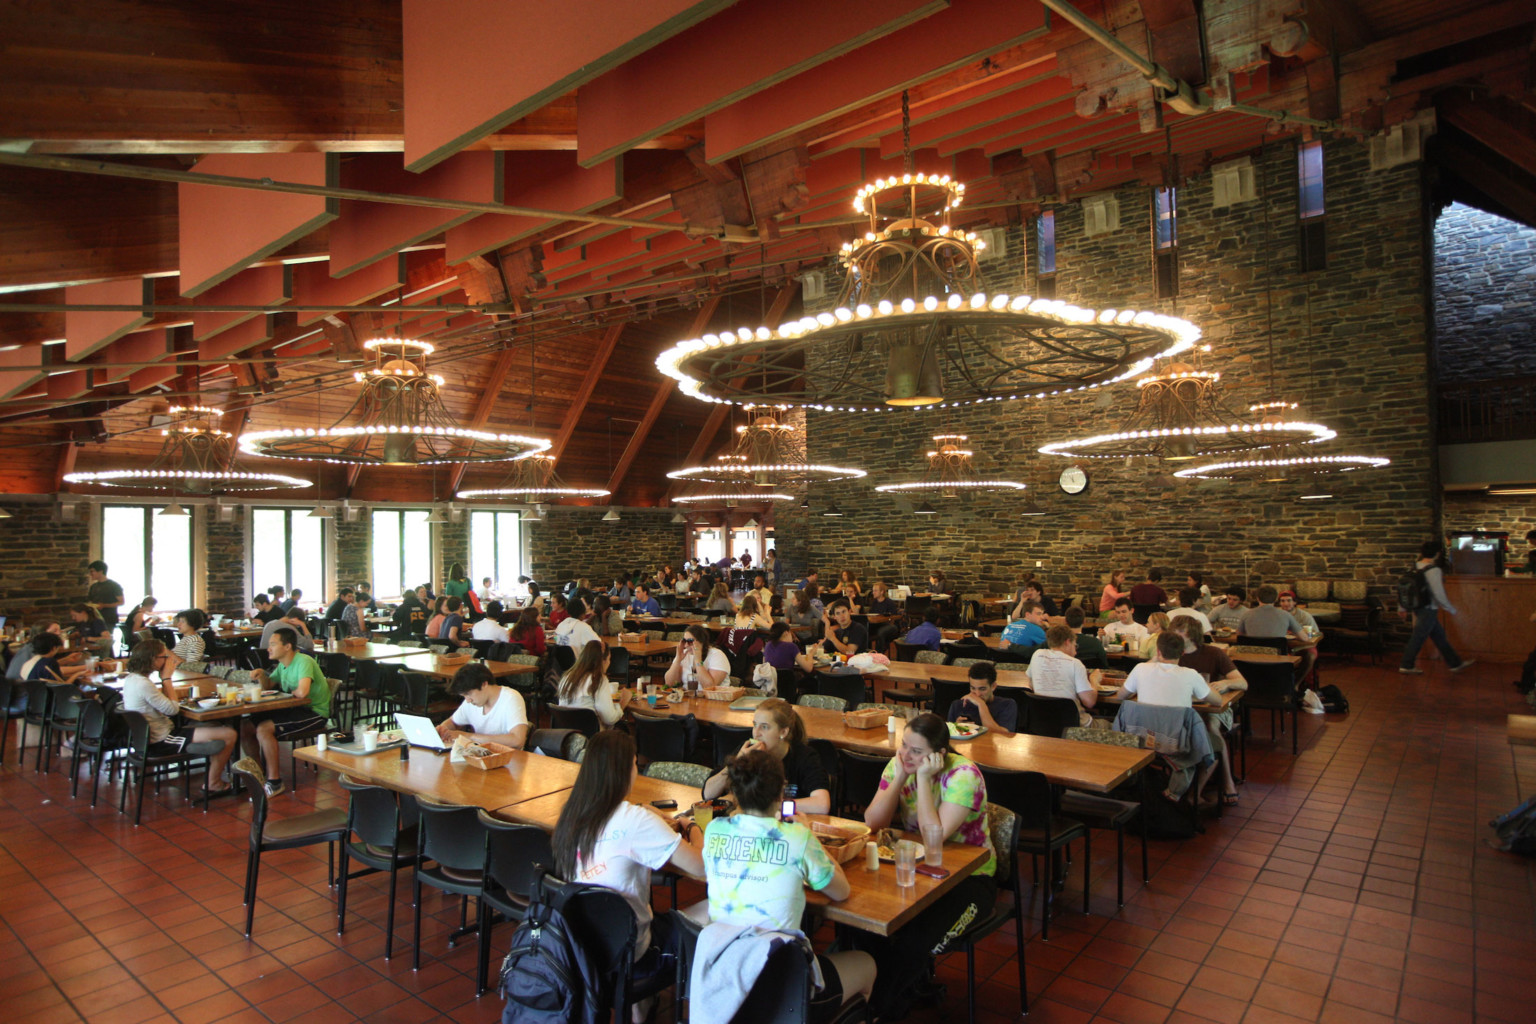 Sharples Dining Hall at Swarthmore College. Rows of tables under wood ceiling with panel accents and layered chandeliers